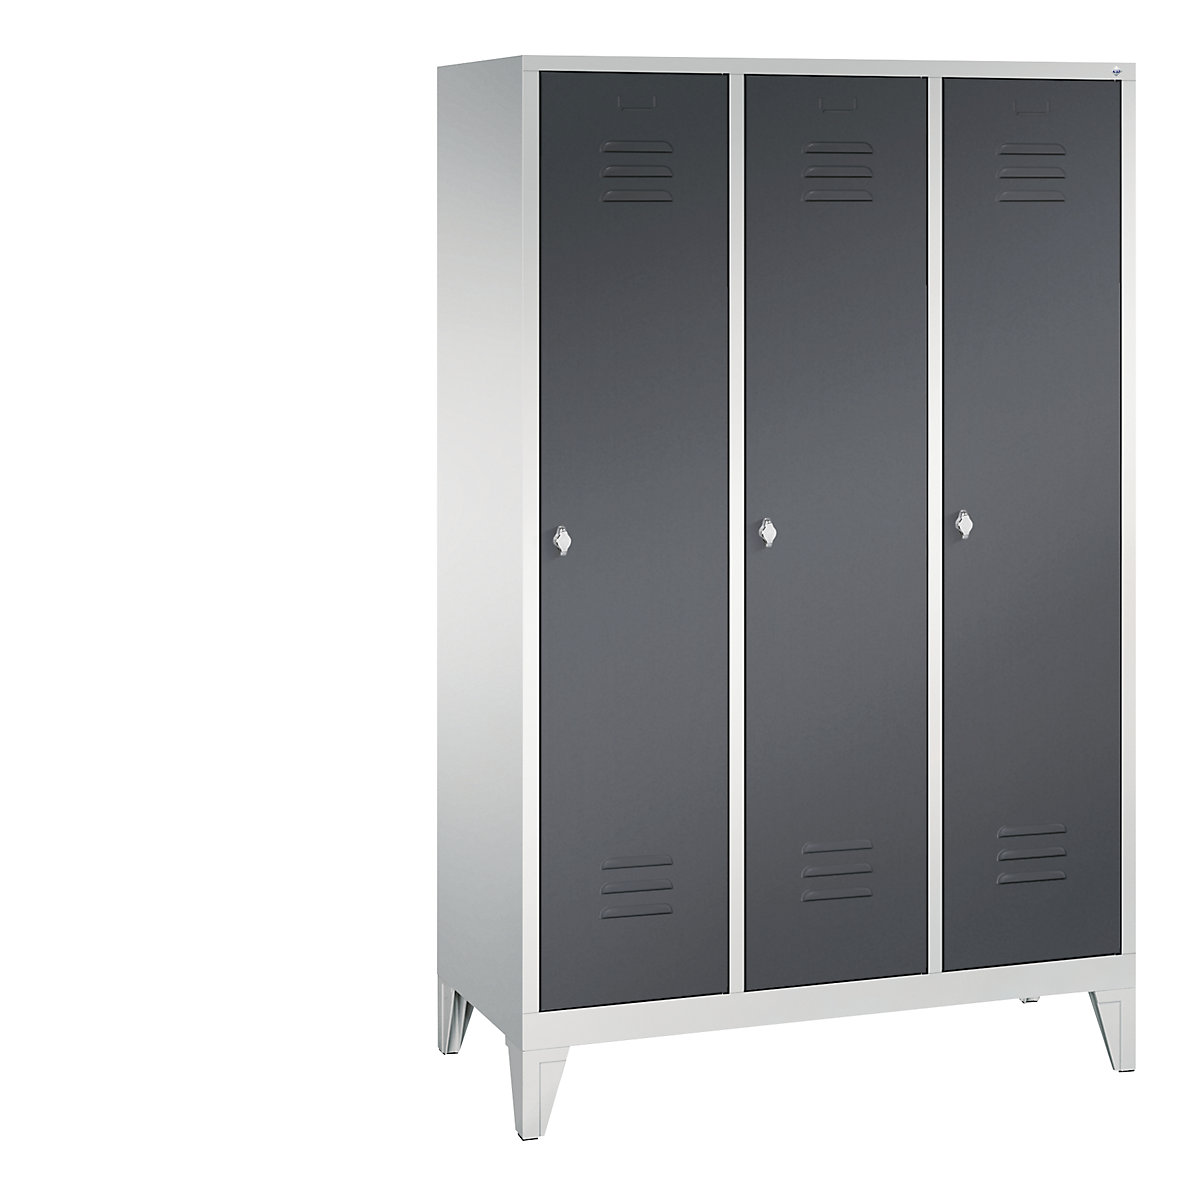 CLASSIC cloakroom locker with feet – C+P, 3 compartments, compartment width 400 mm, light grey / black grey-6